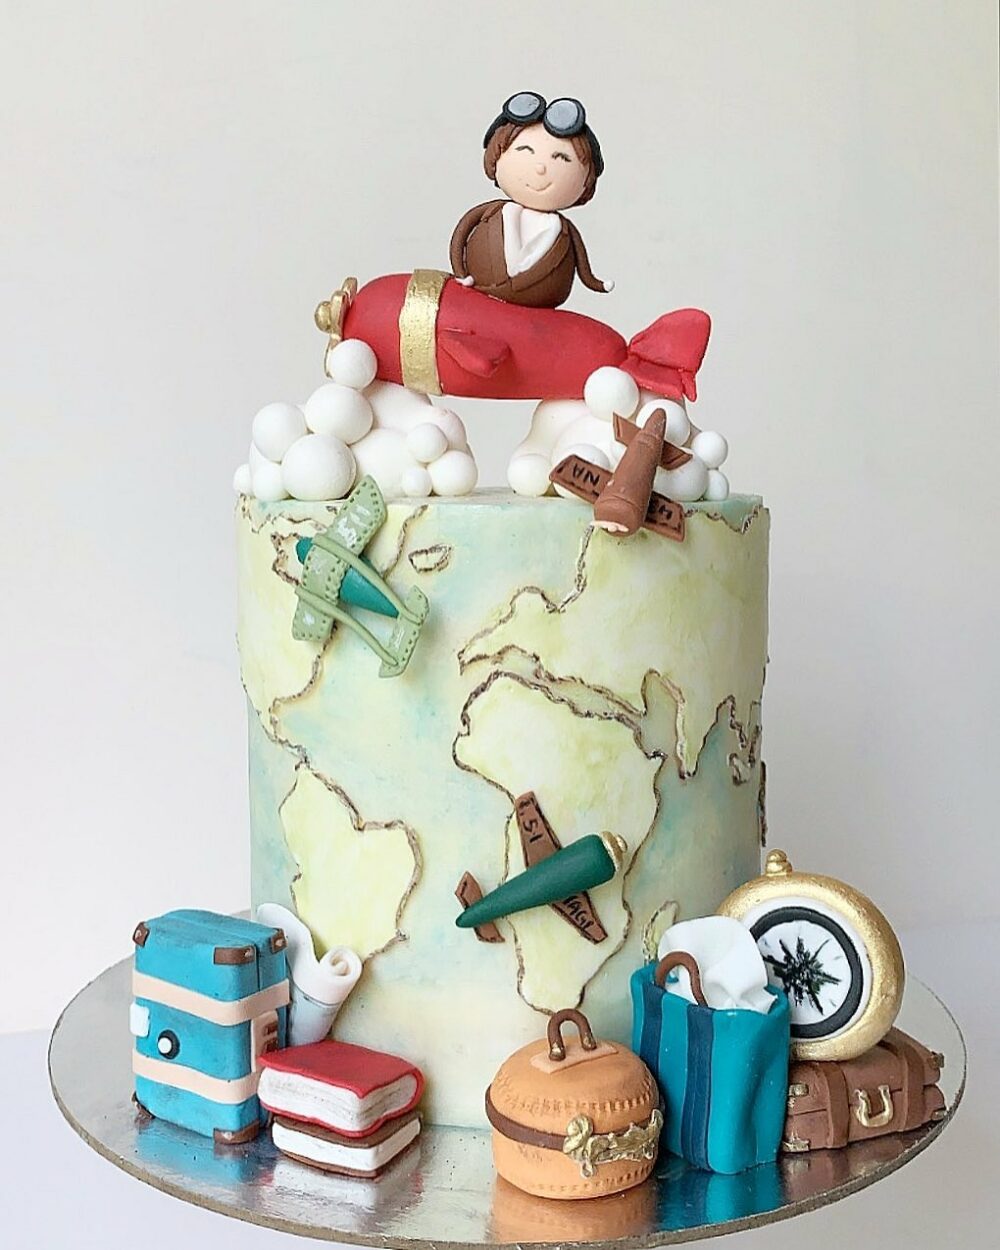 Best travel themed cake idea ever this gorgeous safe travels cake will make any trip more memorable.